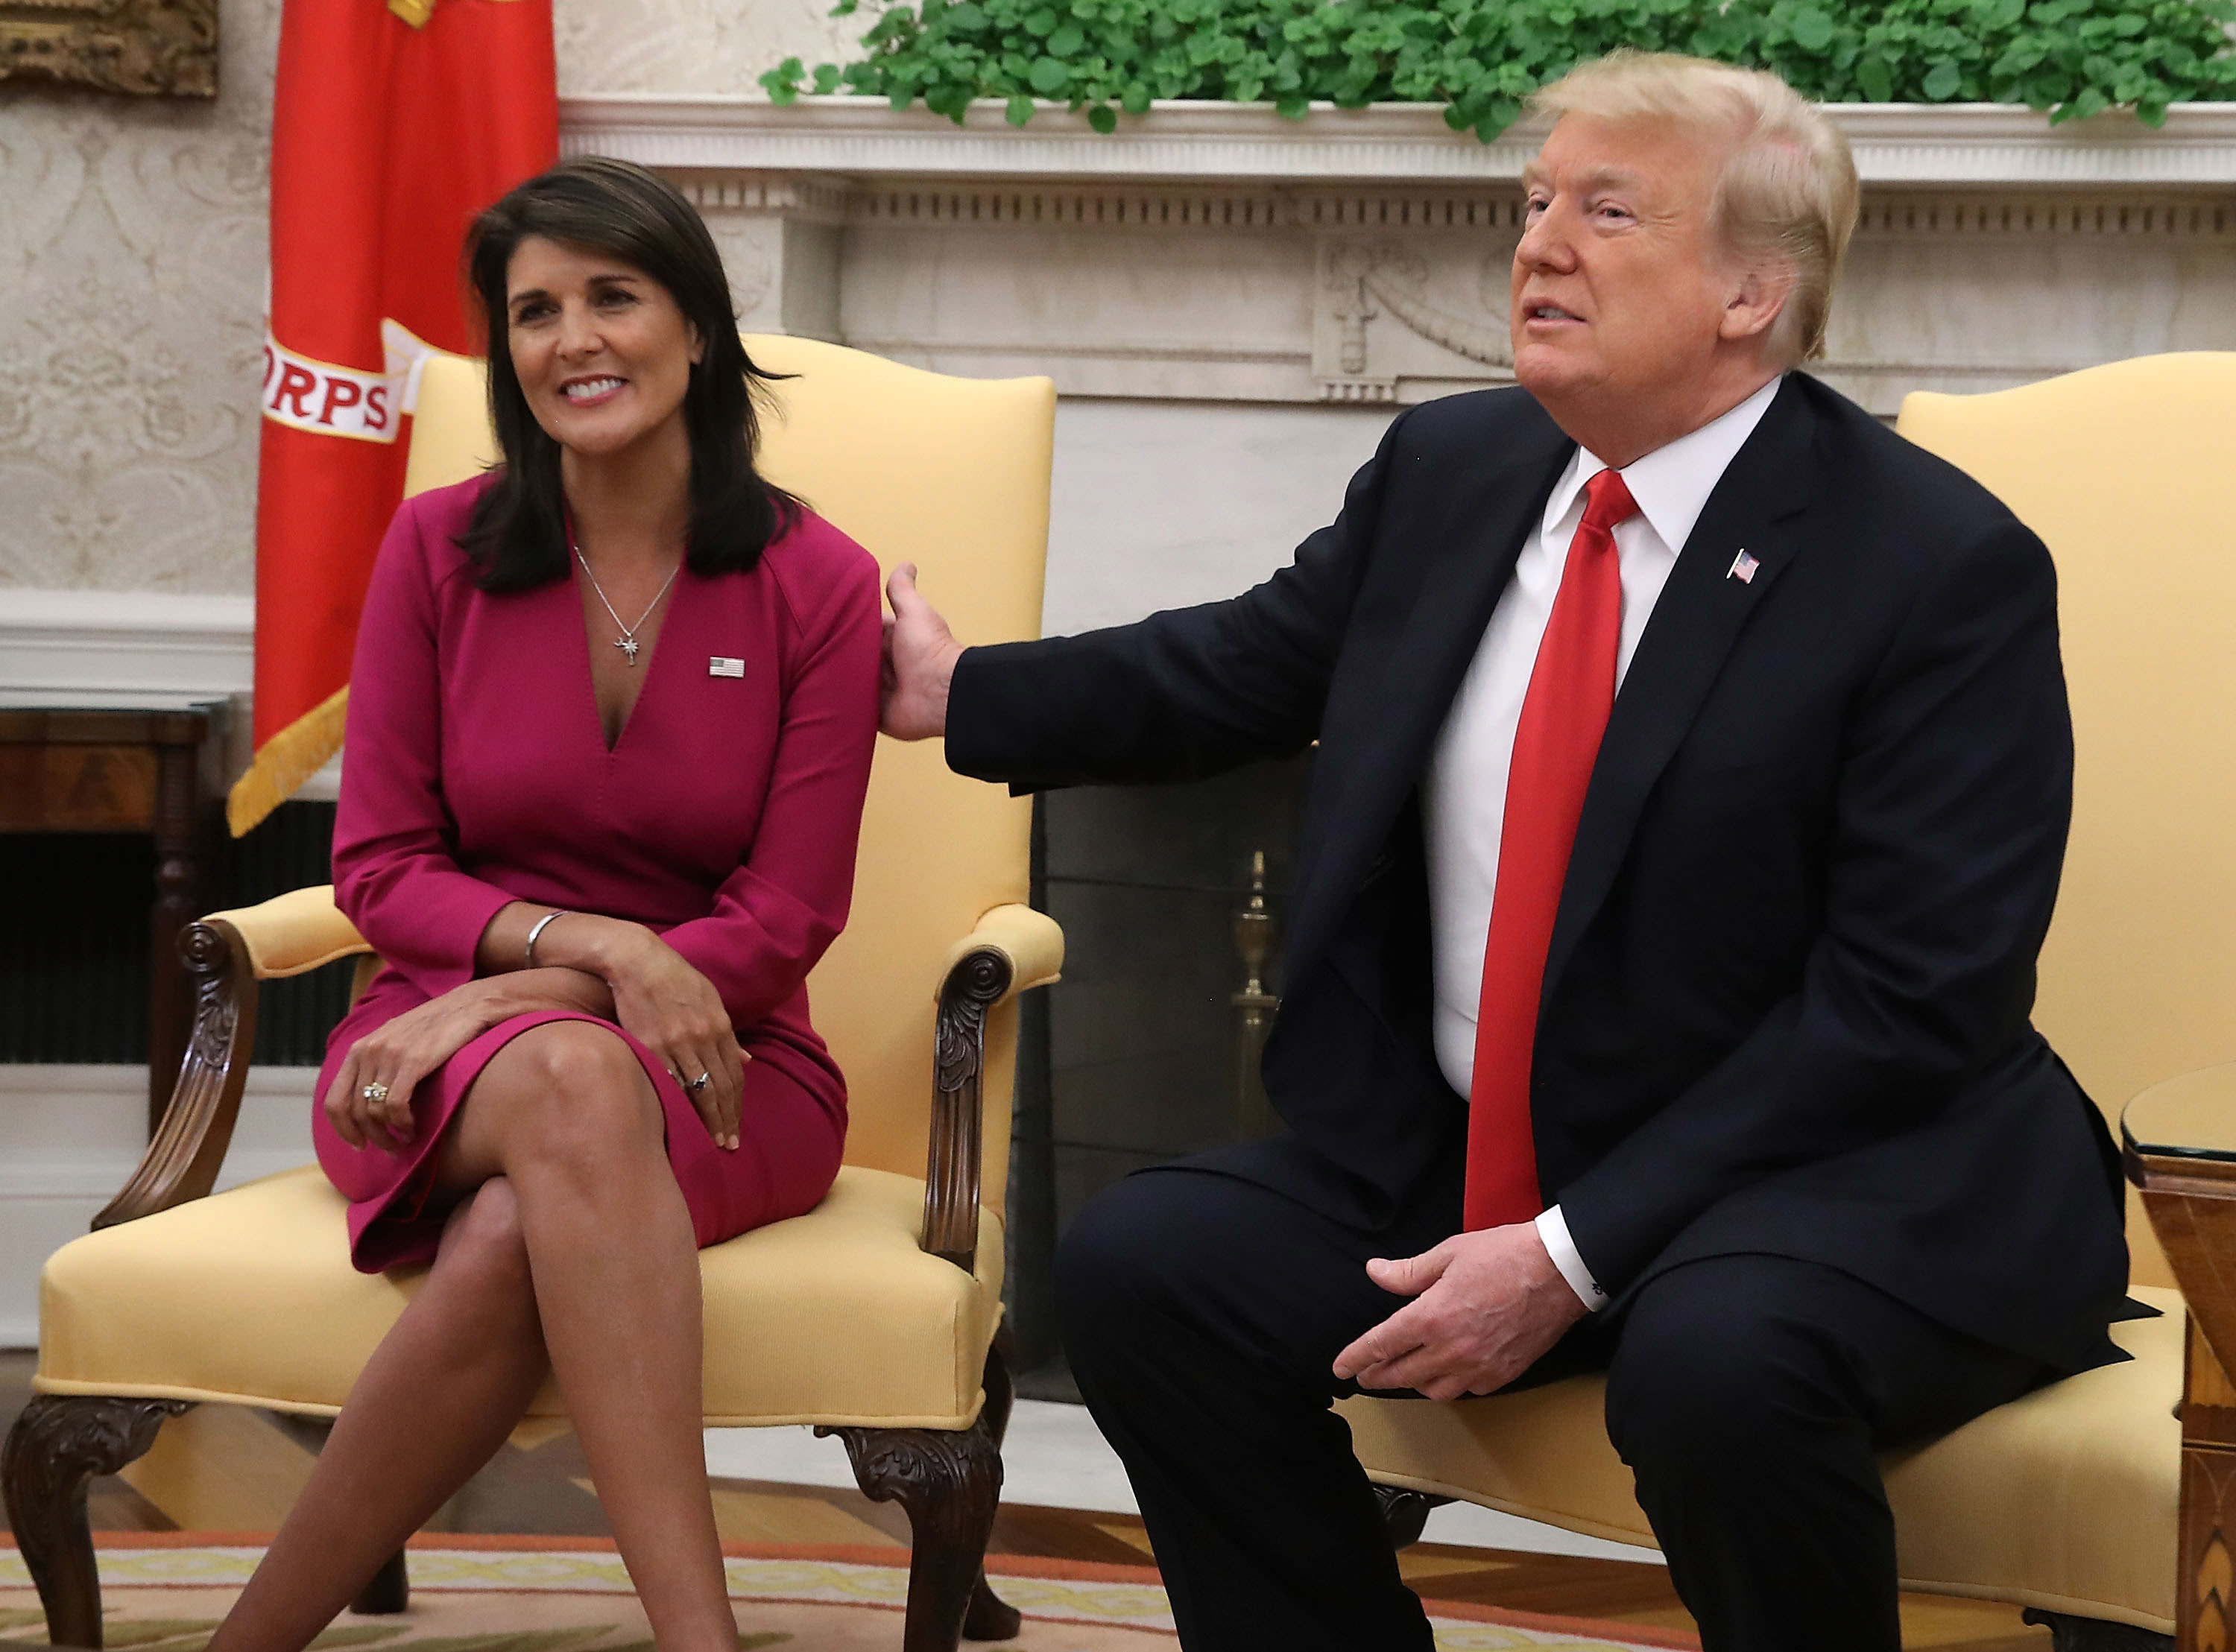 Editorial: Haley’s ambition Trumps principle: Getting back in line like too many Republicans